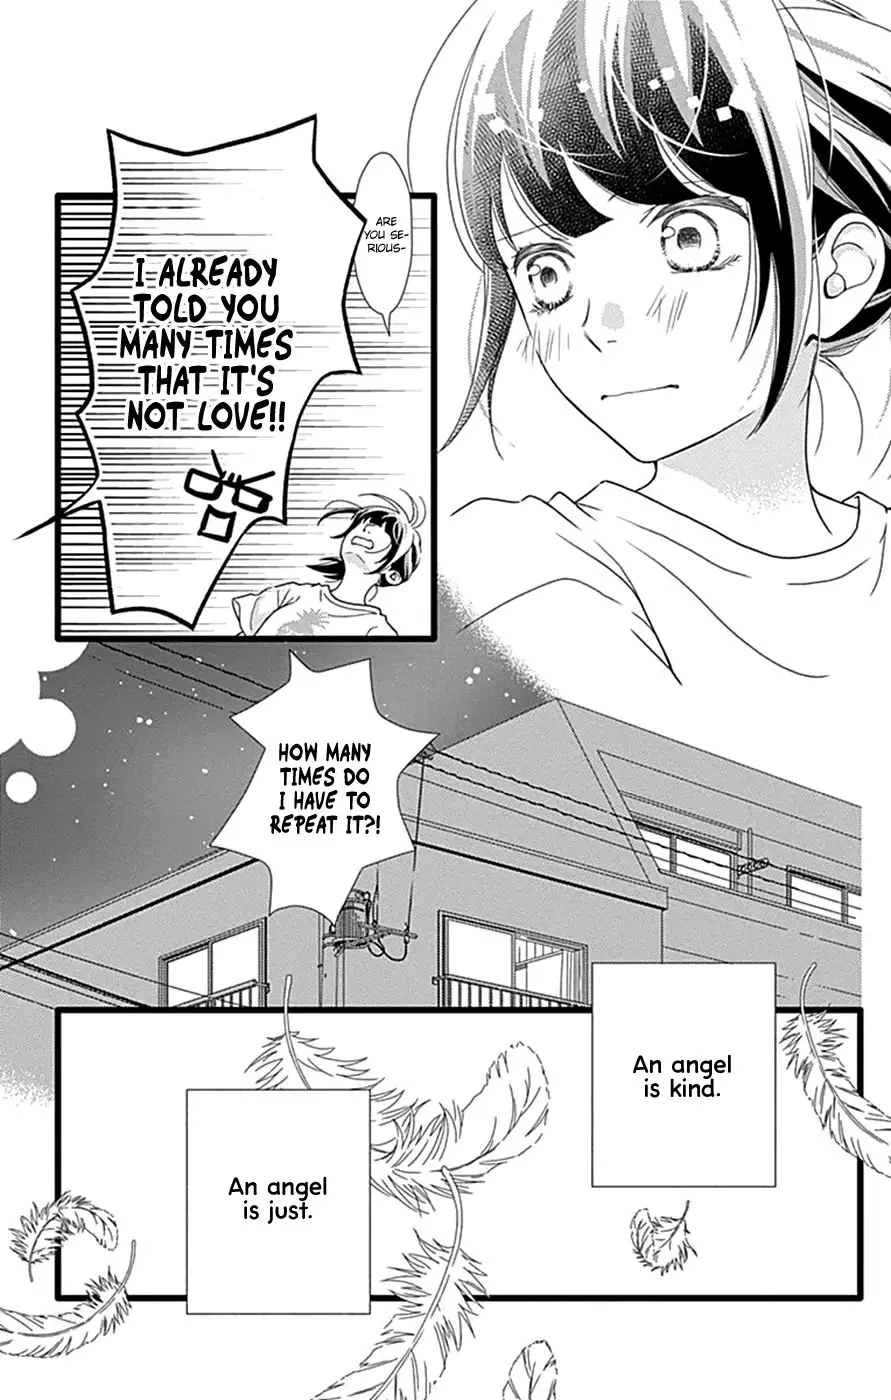 What An Average Way Koiko Goes! - 43 page 20-0a3b0df6